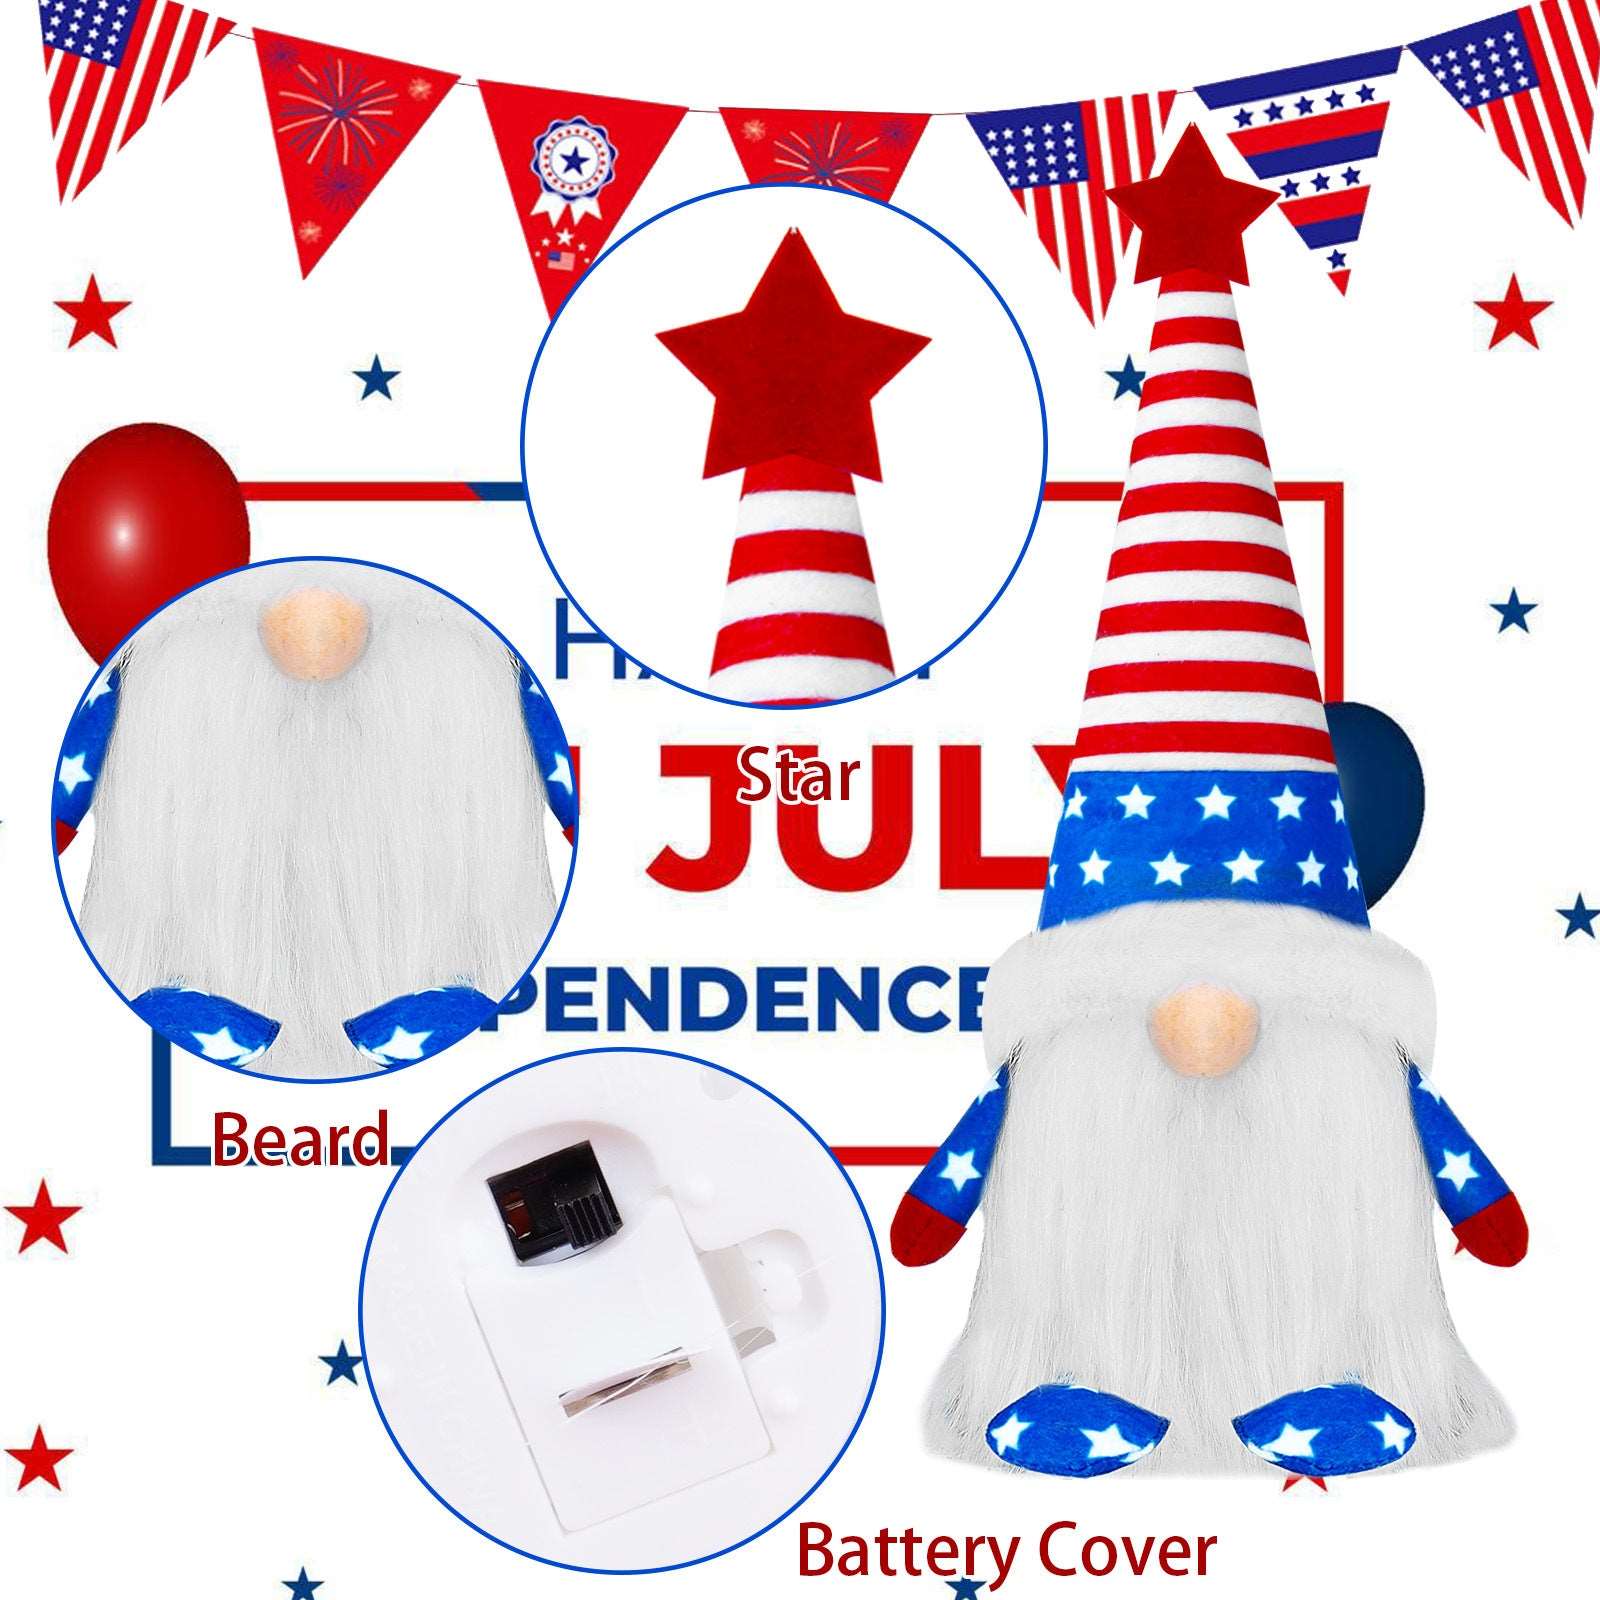 American Independence Day Faceless Doll Shiny Five-pointed Star Doll Decorative PendantAmerican Independence Day Faceless Doll Shiny Five-pointed Star Doll Decorative Pendant, American Independence Day Faceless Doll Shiny Five-pointed Star Doll Decorative Pendant, 4th of july Gnomes